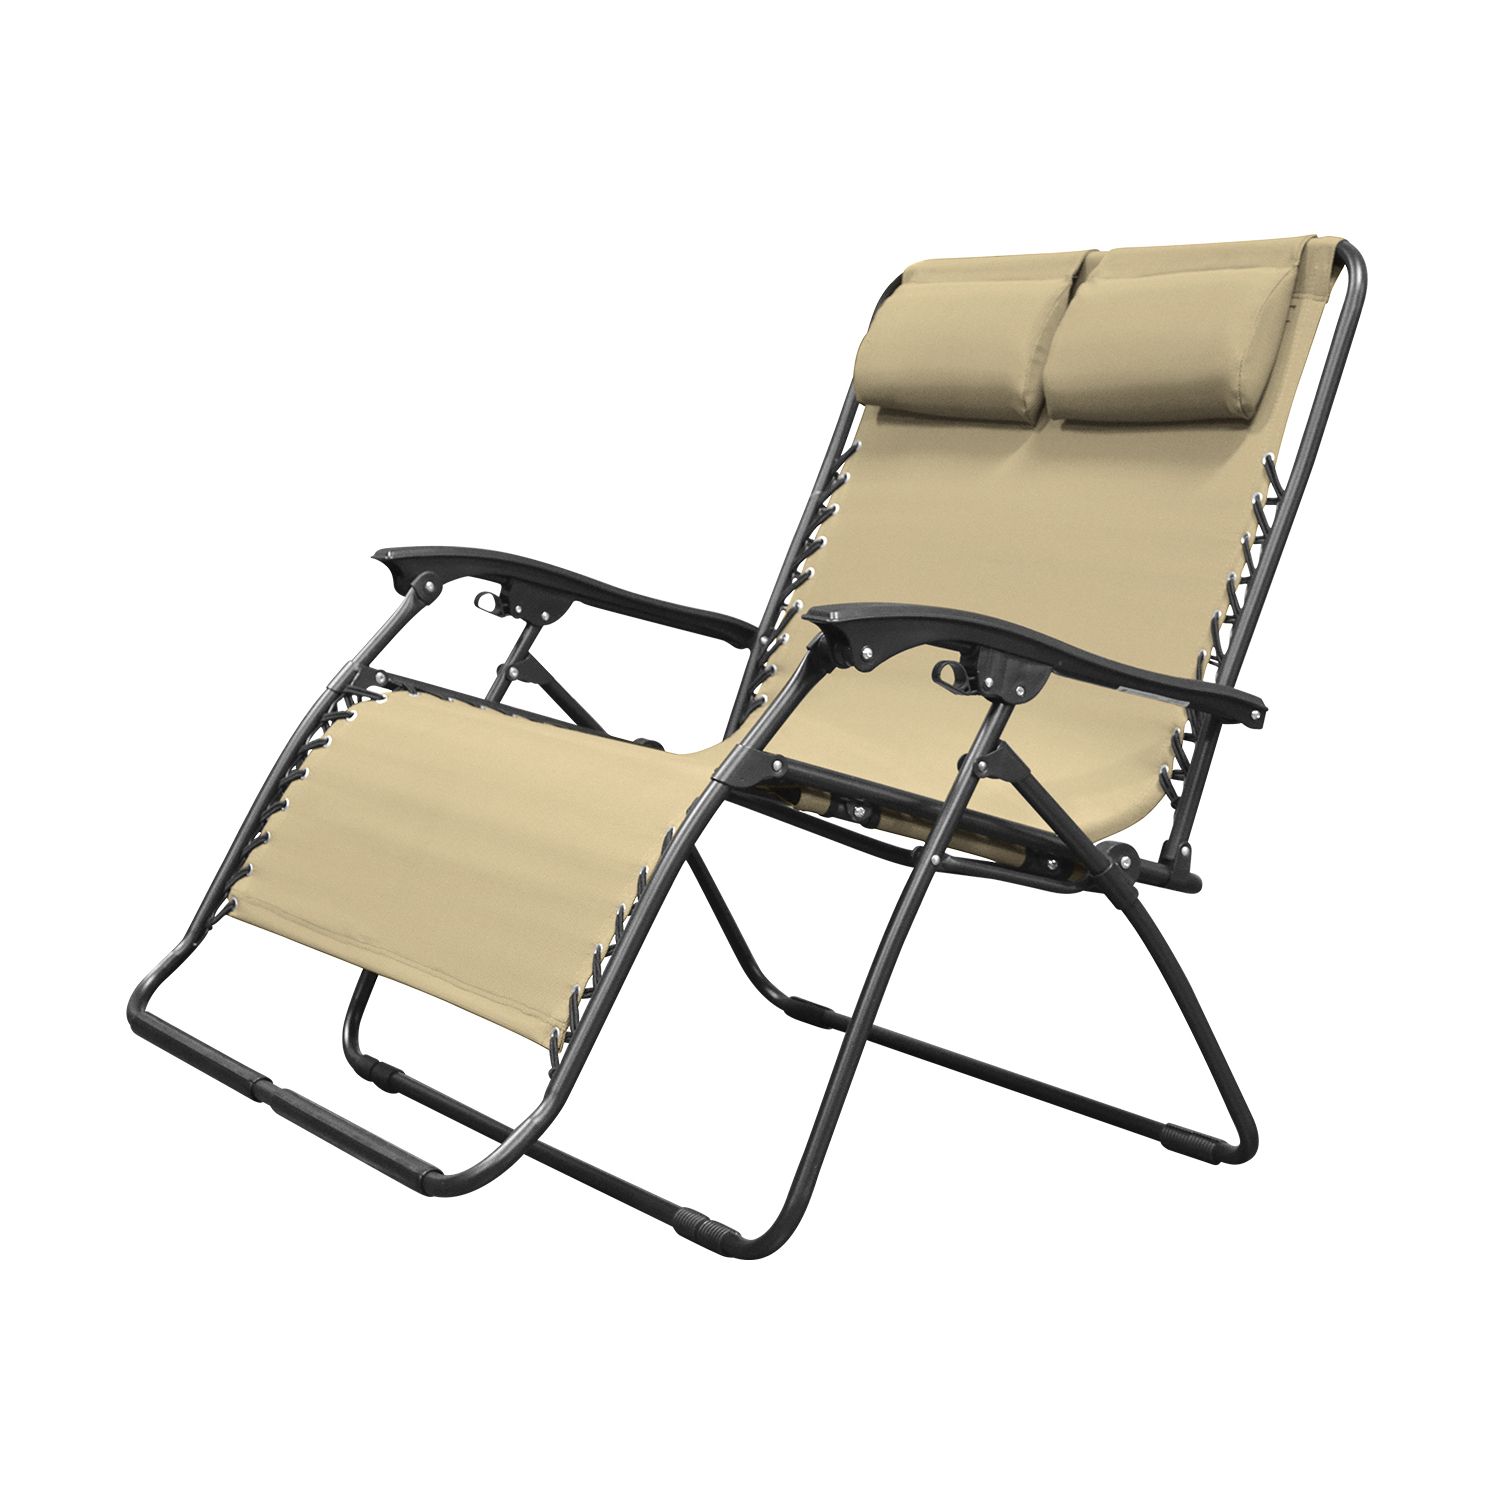 Well Known Caravan Canopy Zero Gravity Chairs Throughout Infinity Loveseat Zero Gravity Chair (View 11 of 25)